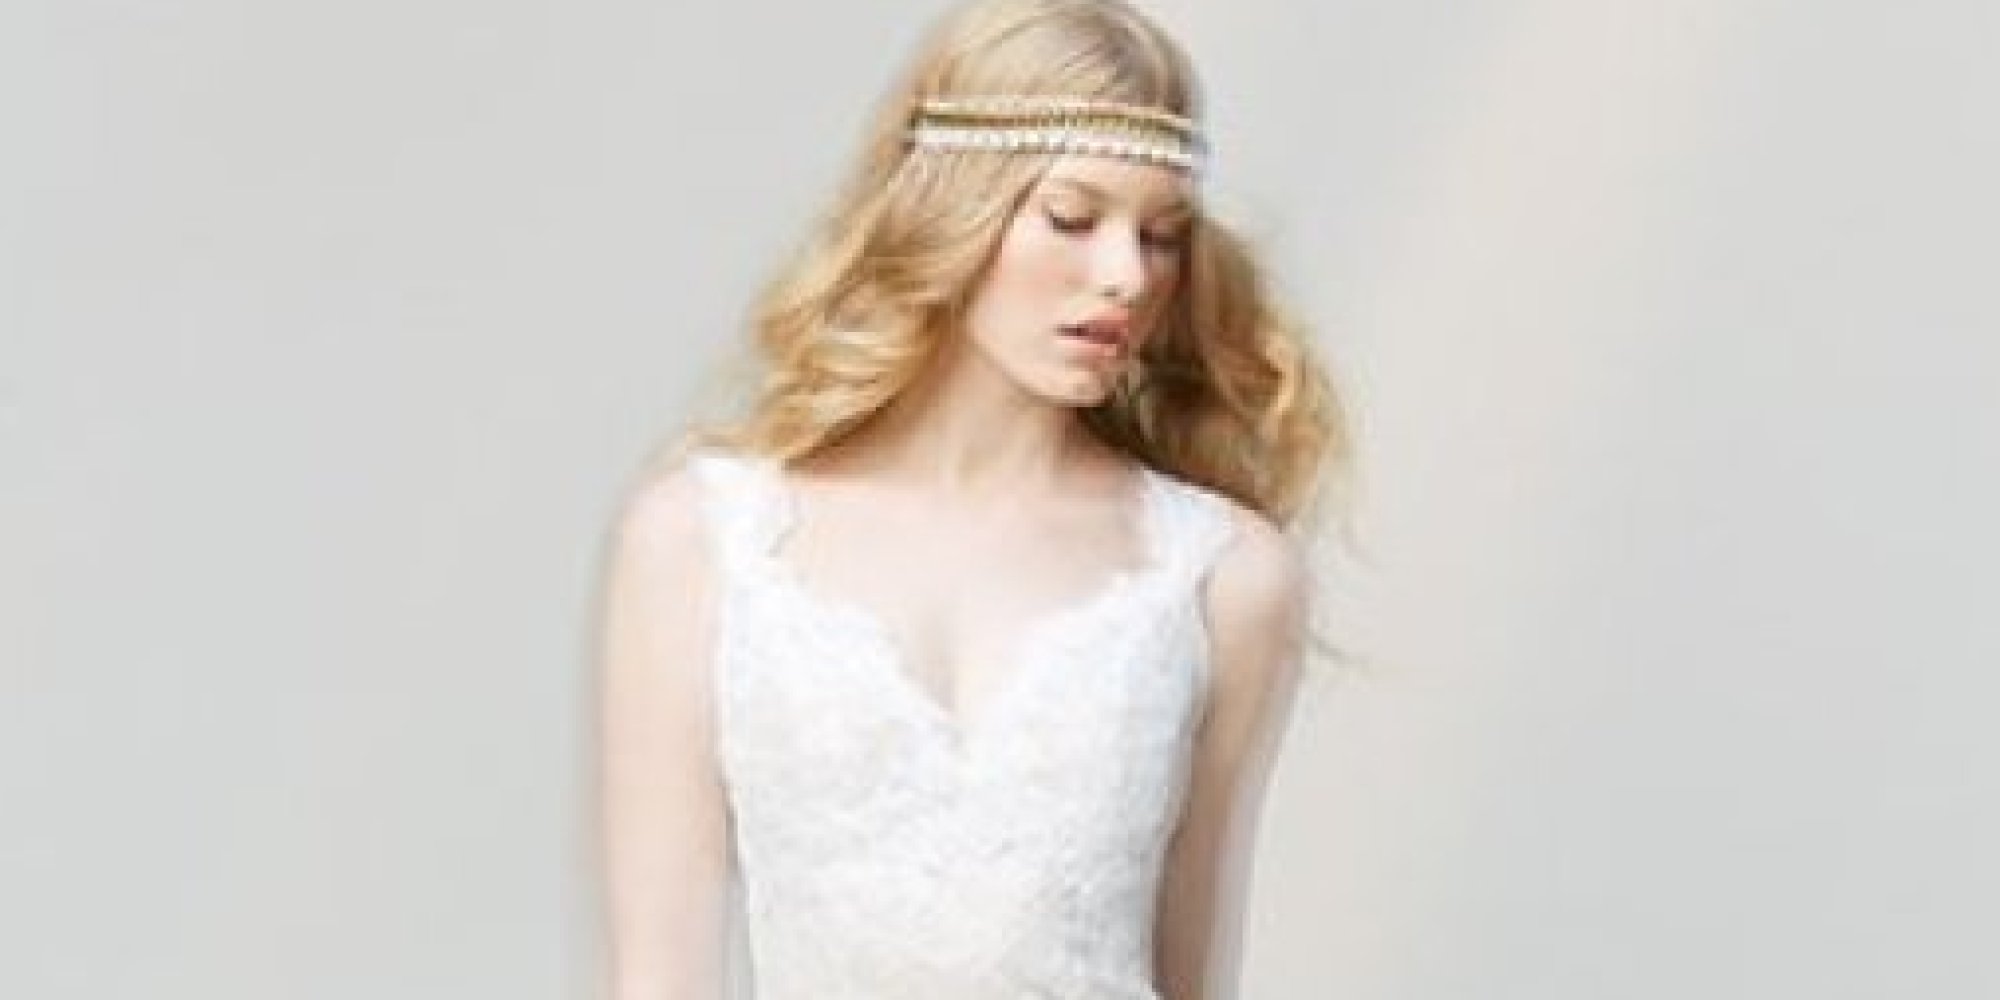 25 Lace Wedding Gowns That Will Make You Swoon | HuffPost